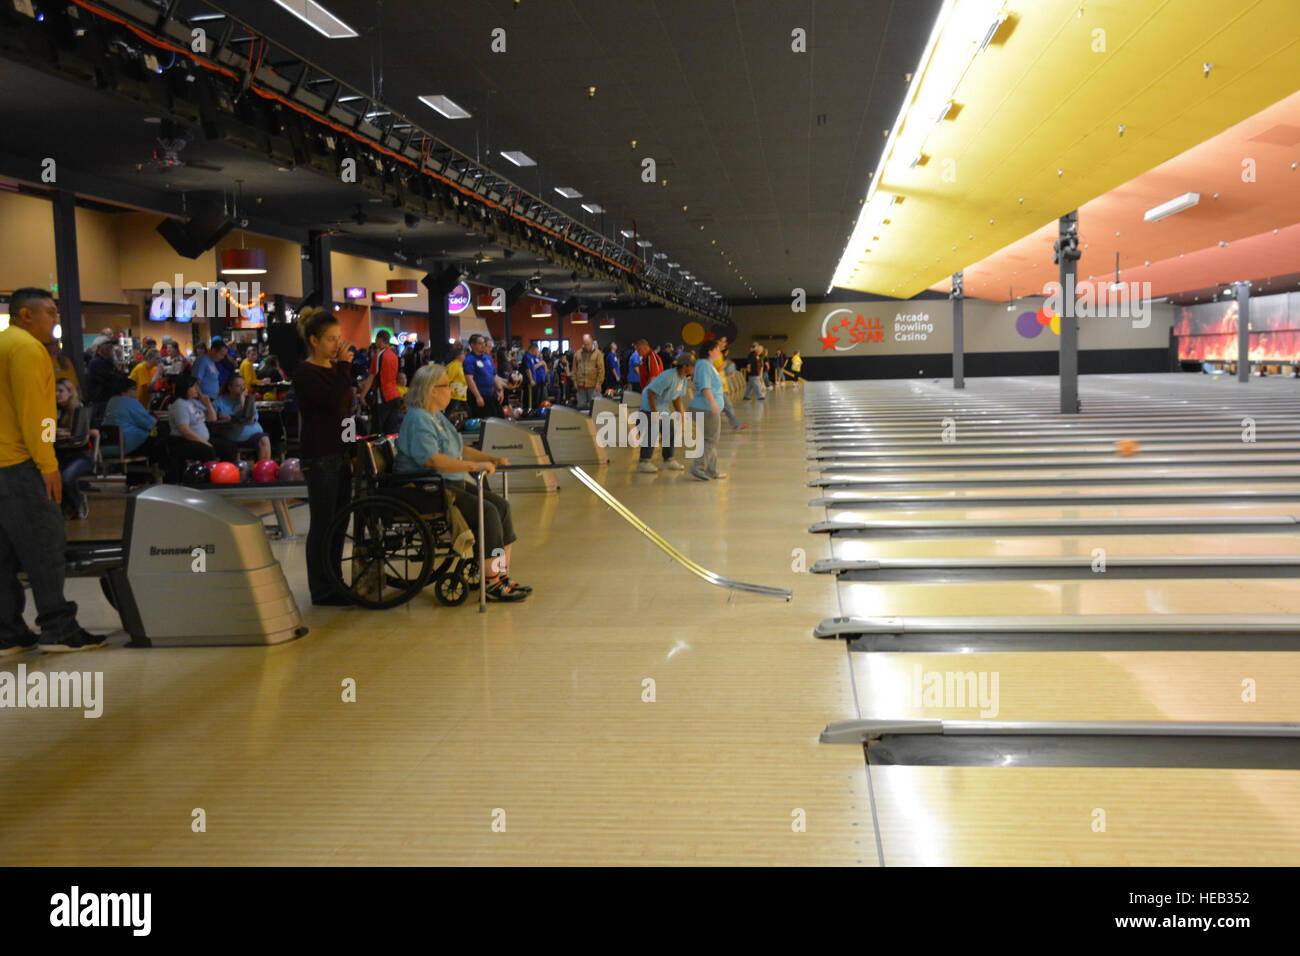 161030-N-KW311-011 SILVERDALE, Wash. (Oct. 30, 2016) Special Olympics  bowling participants perfect their technique prior to the tournament at All  Star Lanes and Casino here. Nearly 30 sailors from Naval Base Kitsap (NBK)